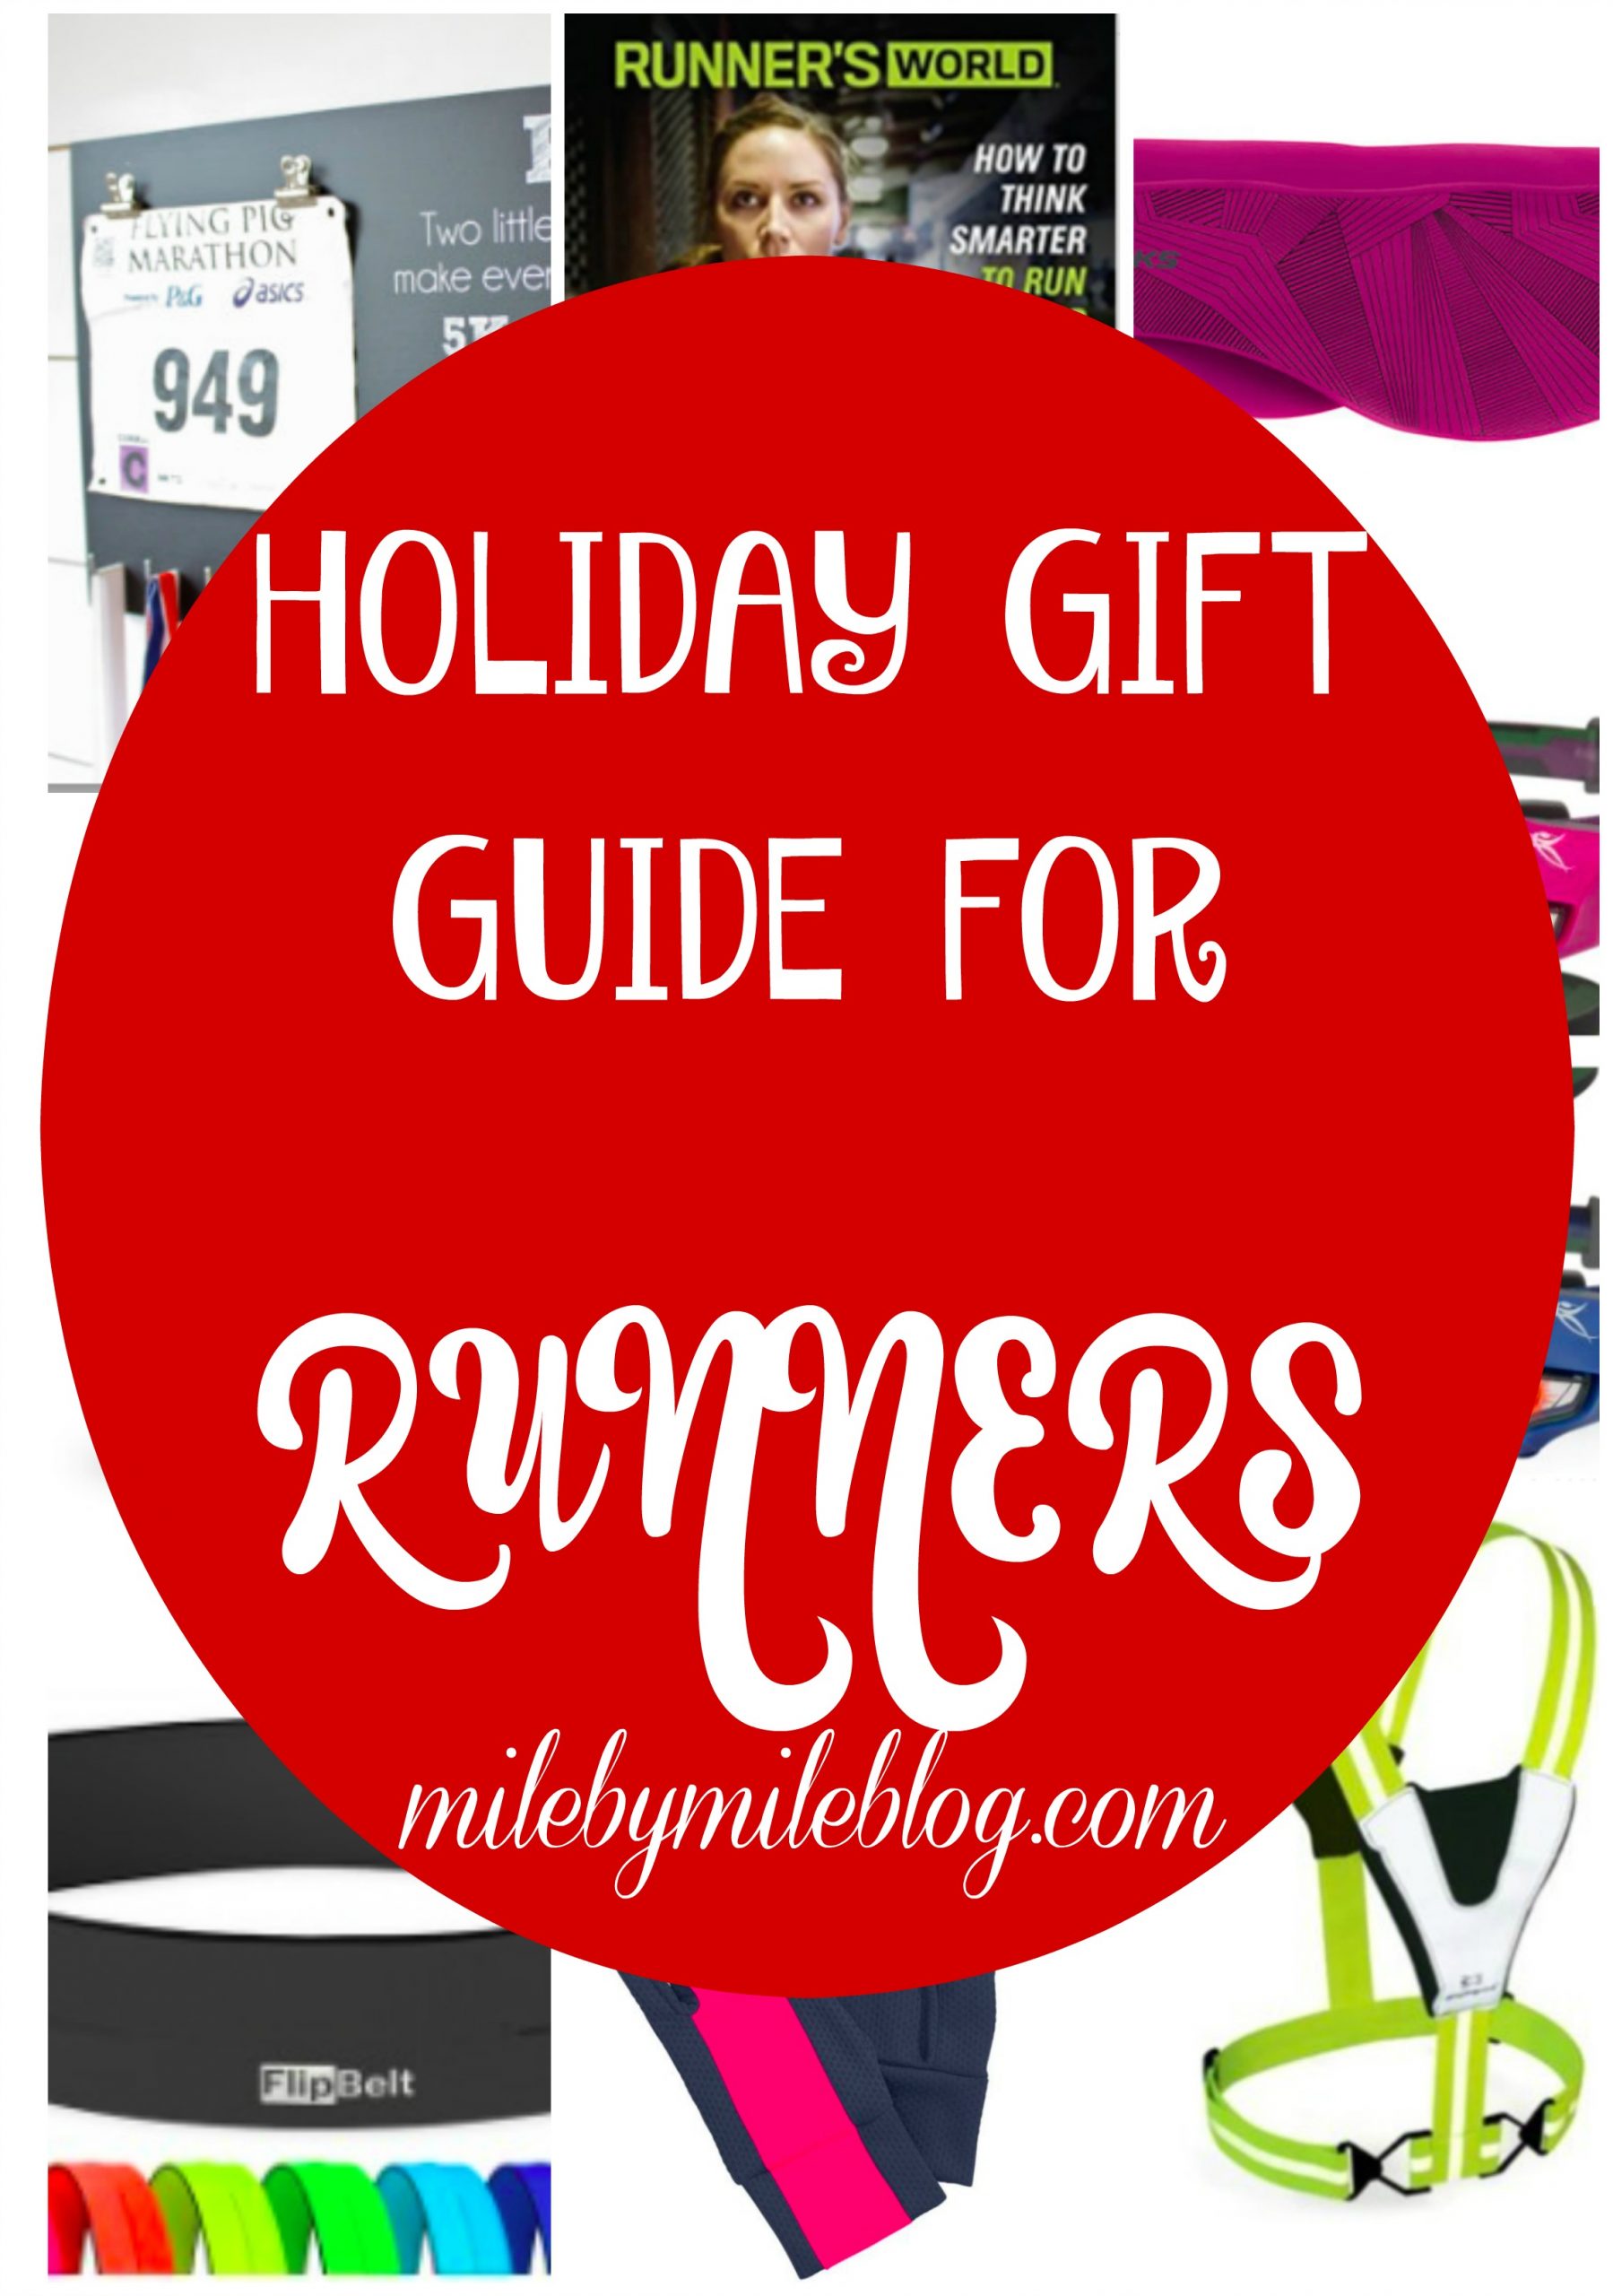 Looking for the perfect gift for the runner in your life? Here are some great ideas that any runner would love to receive! #running #gifts #hollidays